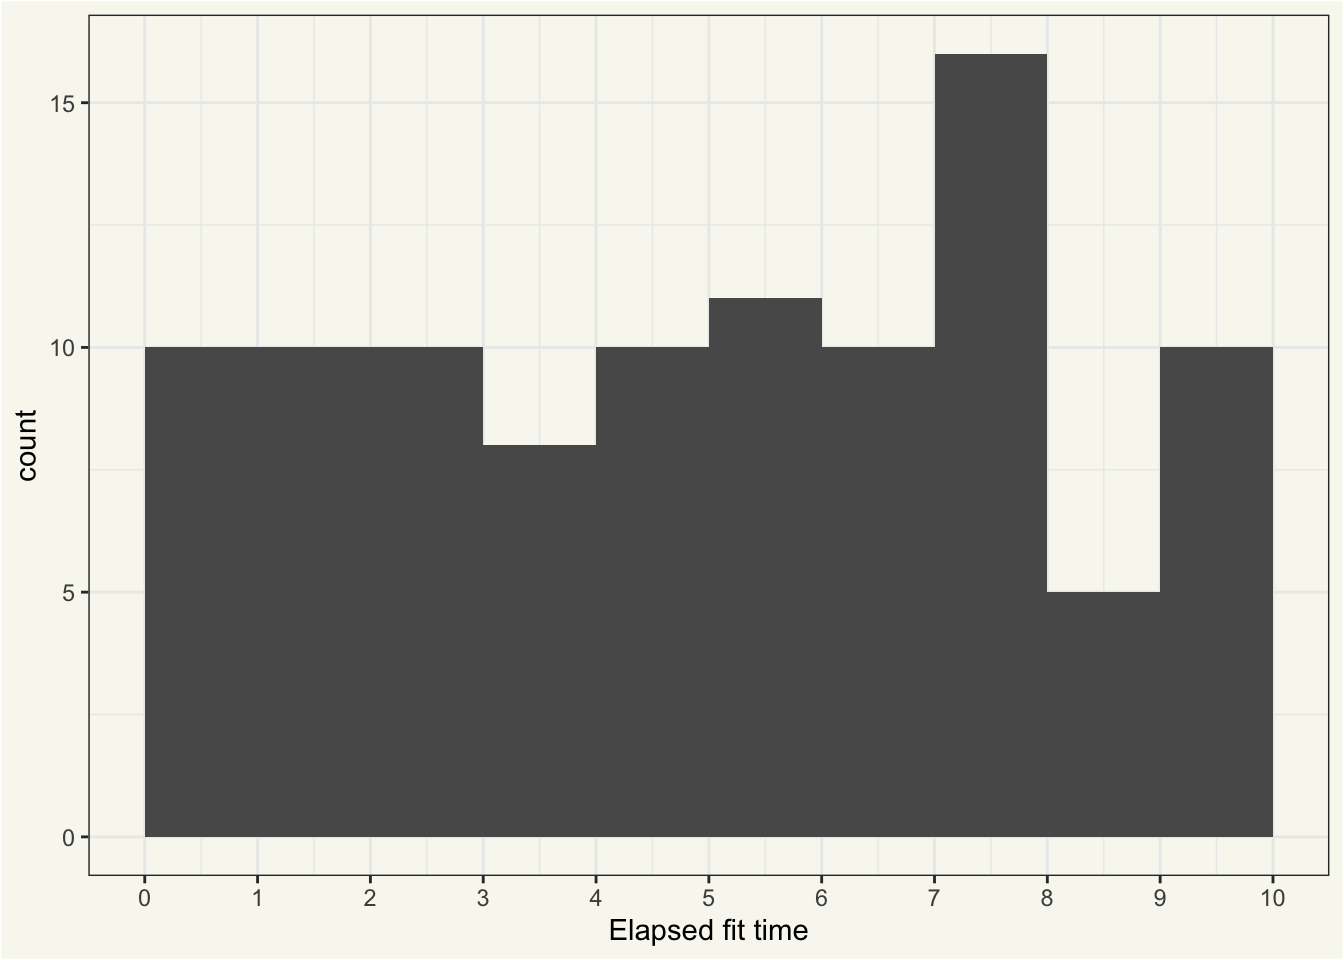 A ggplot histogram showing elapsed fit times varying from almost 0 to around 10. The distribution is uniform; each bin contains nearly the same count of values.